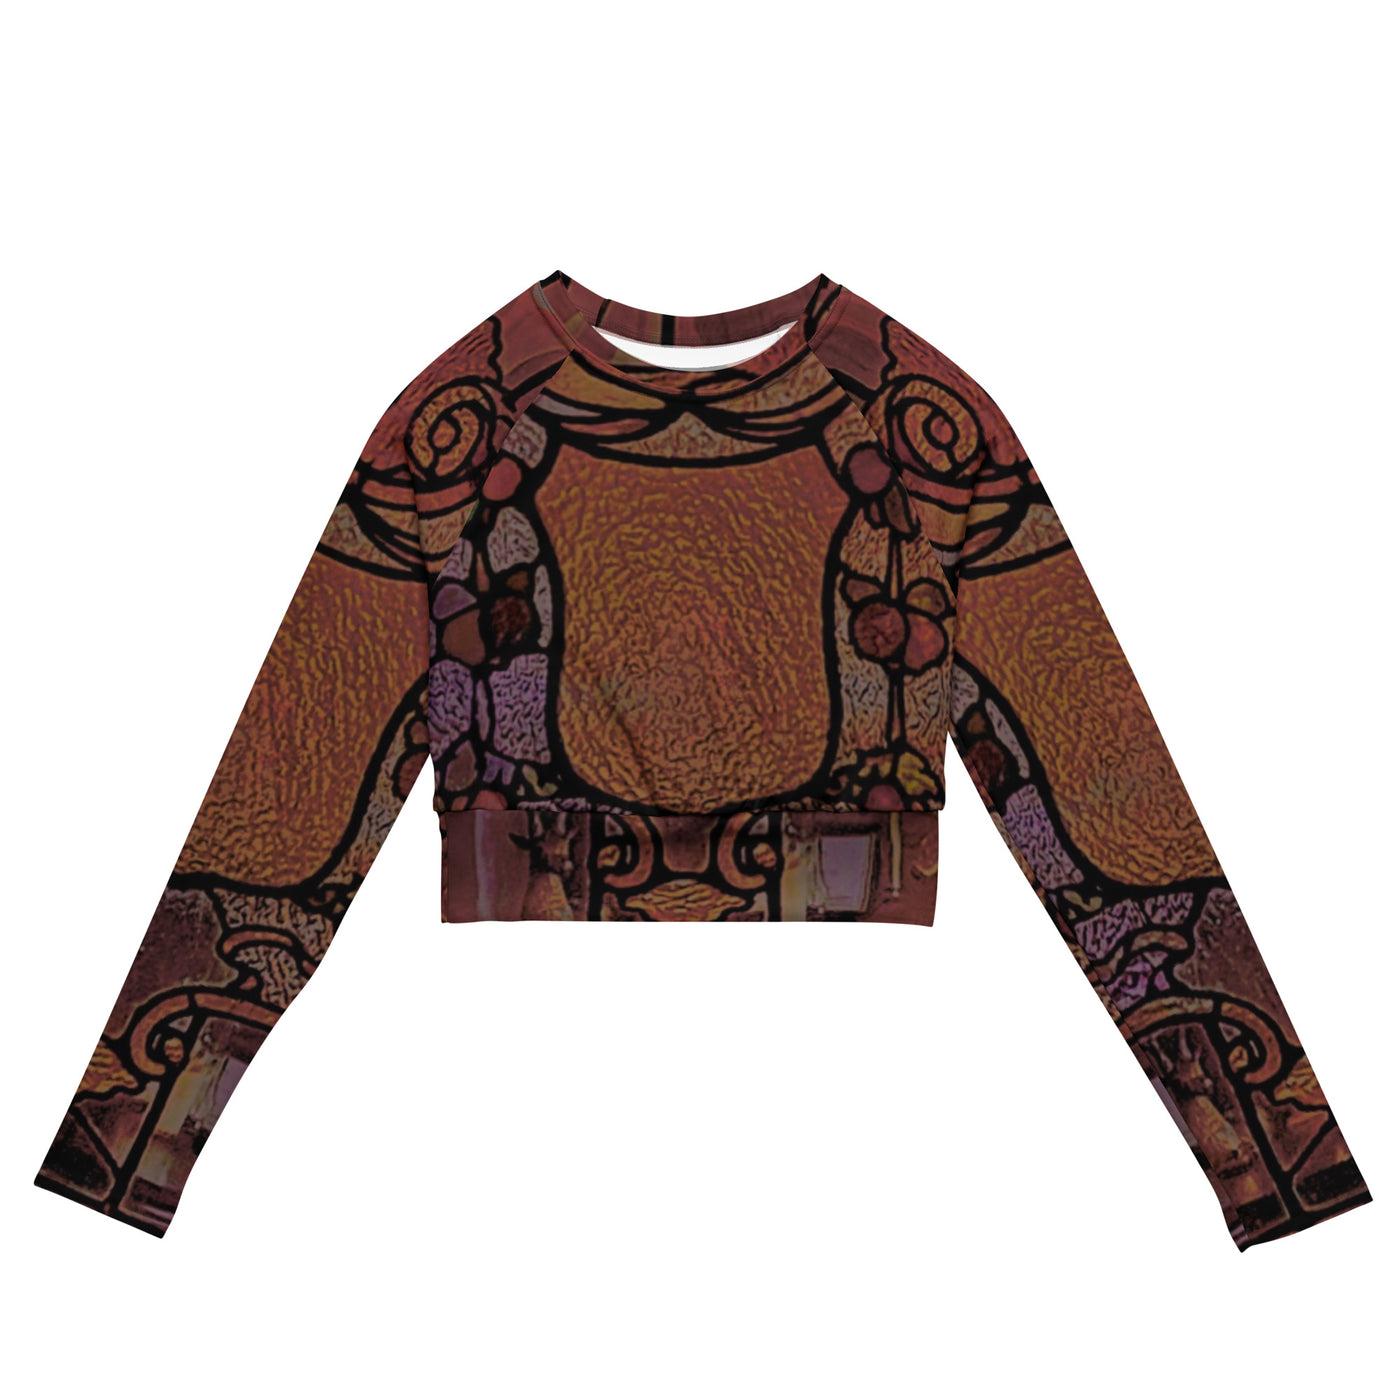 CheyenneeMagicWarrior Recycled Save the Planet Crop Top